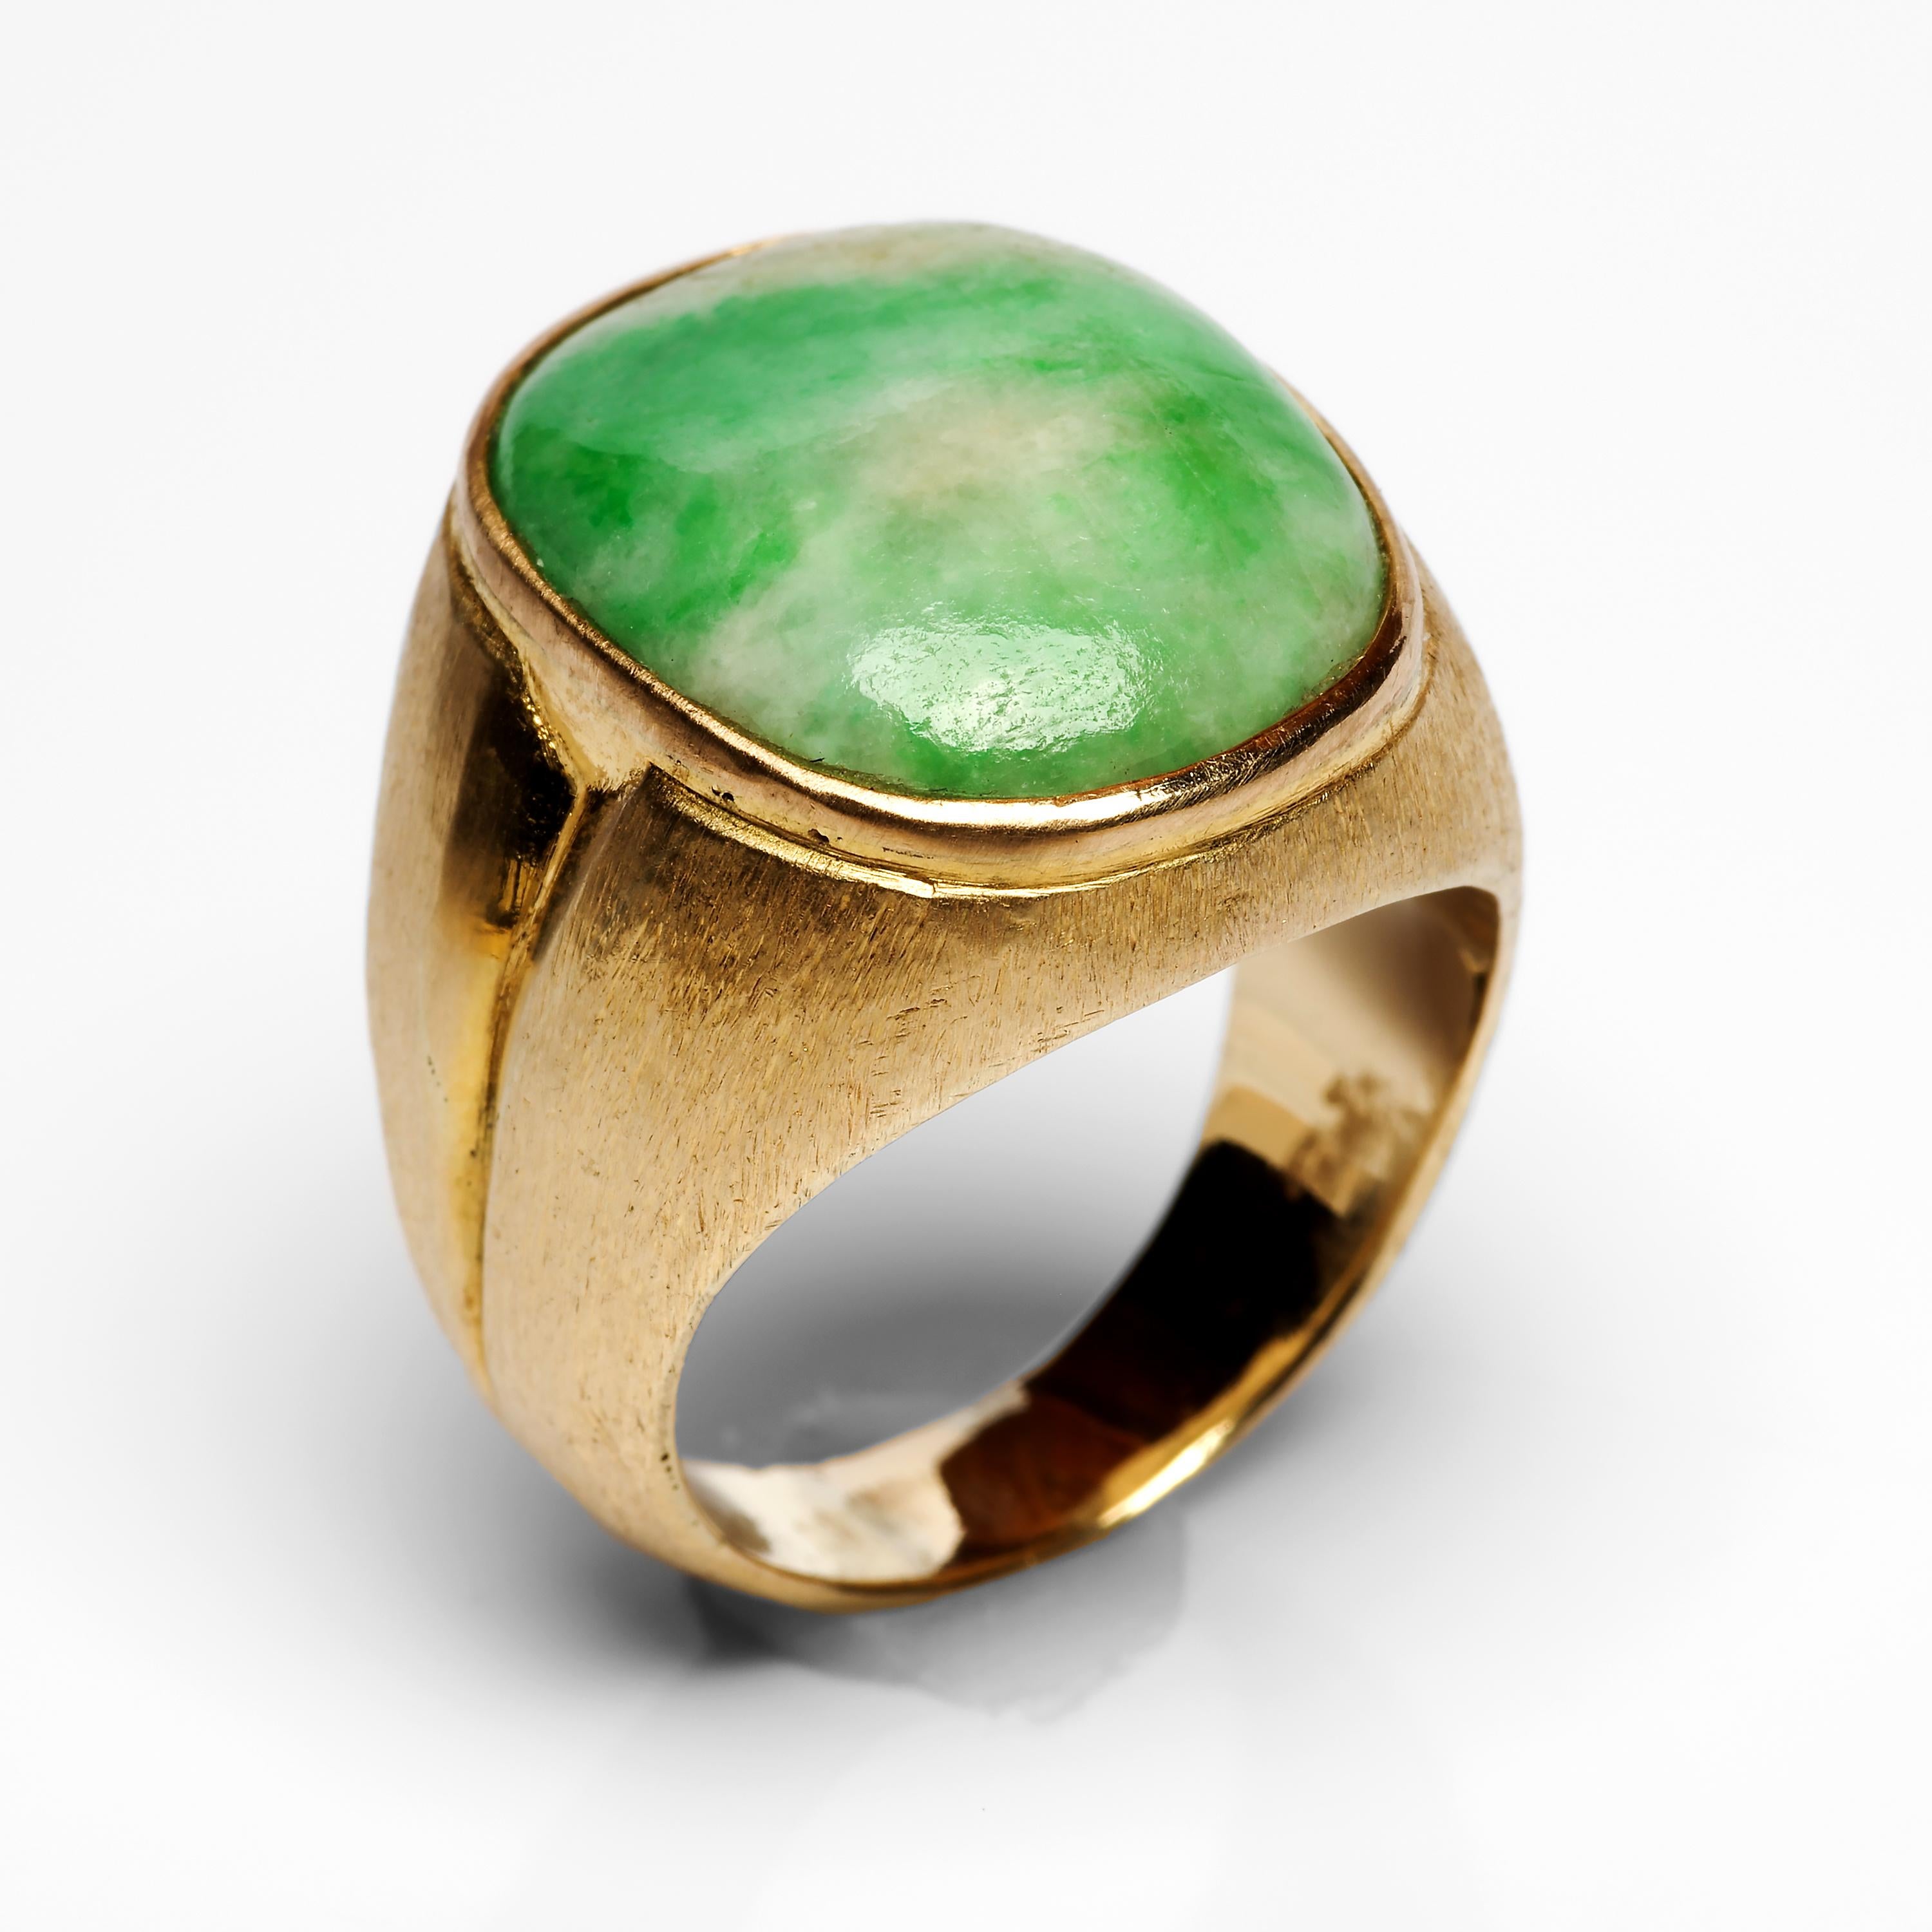 This extraordinary ring features a large (19.4mm x 15.5mm) cabochon of natural and untreated white and green jadeite jade known as 